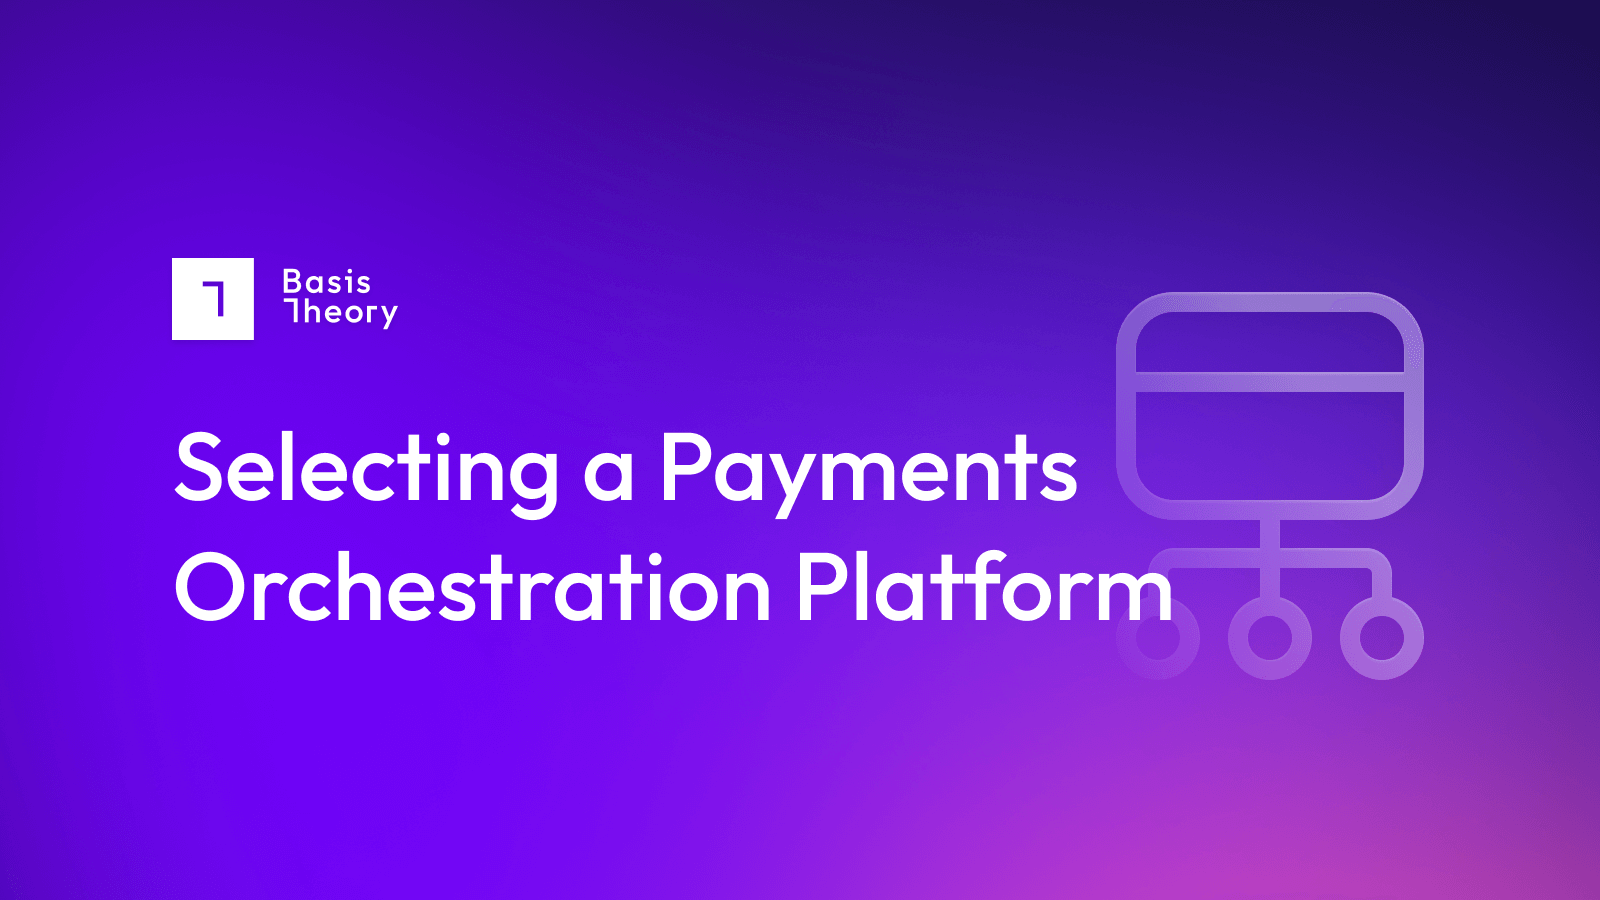 Selecting a Payments Orchestration Platform